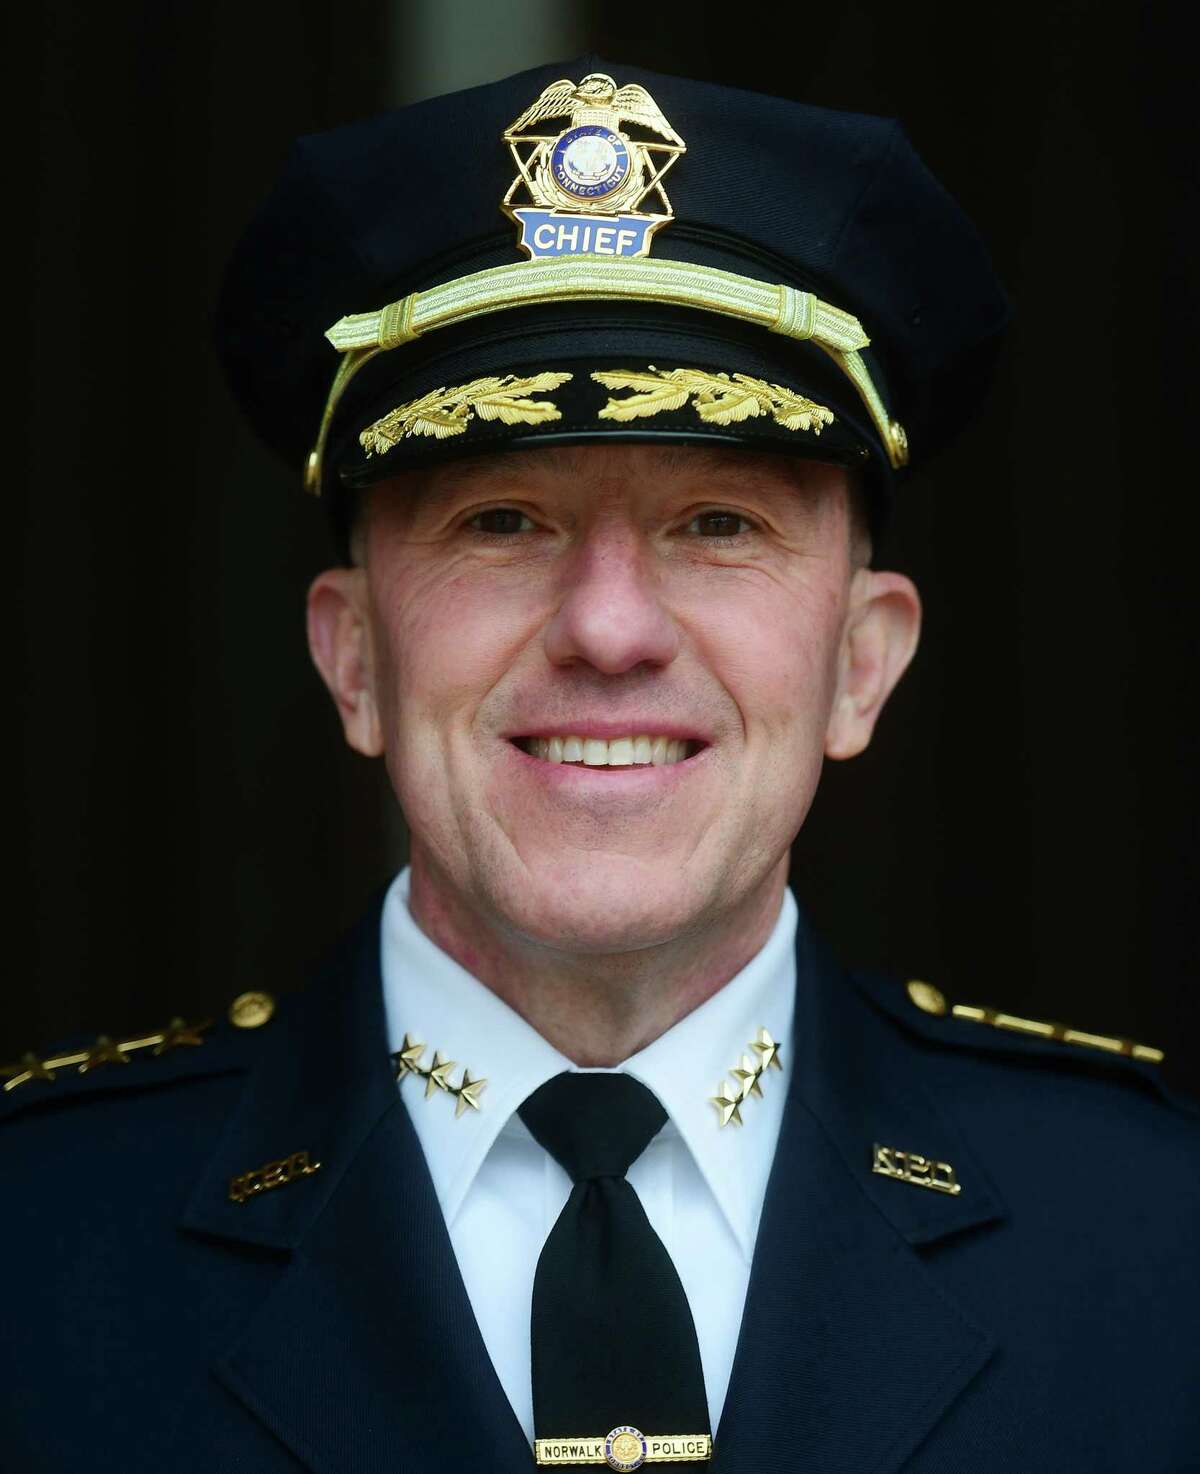 New Norwalk Police Chief James Walsh was sworn in in a promotion ceremony at City Hall in Norwalk, Conn. on Wednesday, January 25, 2023.